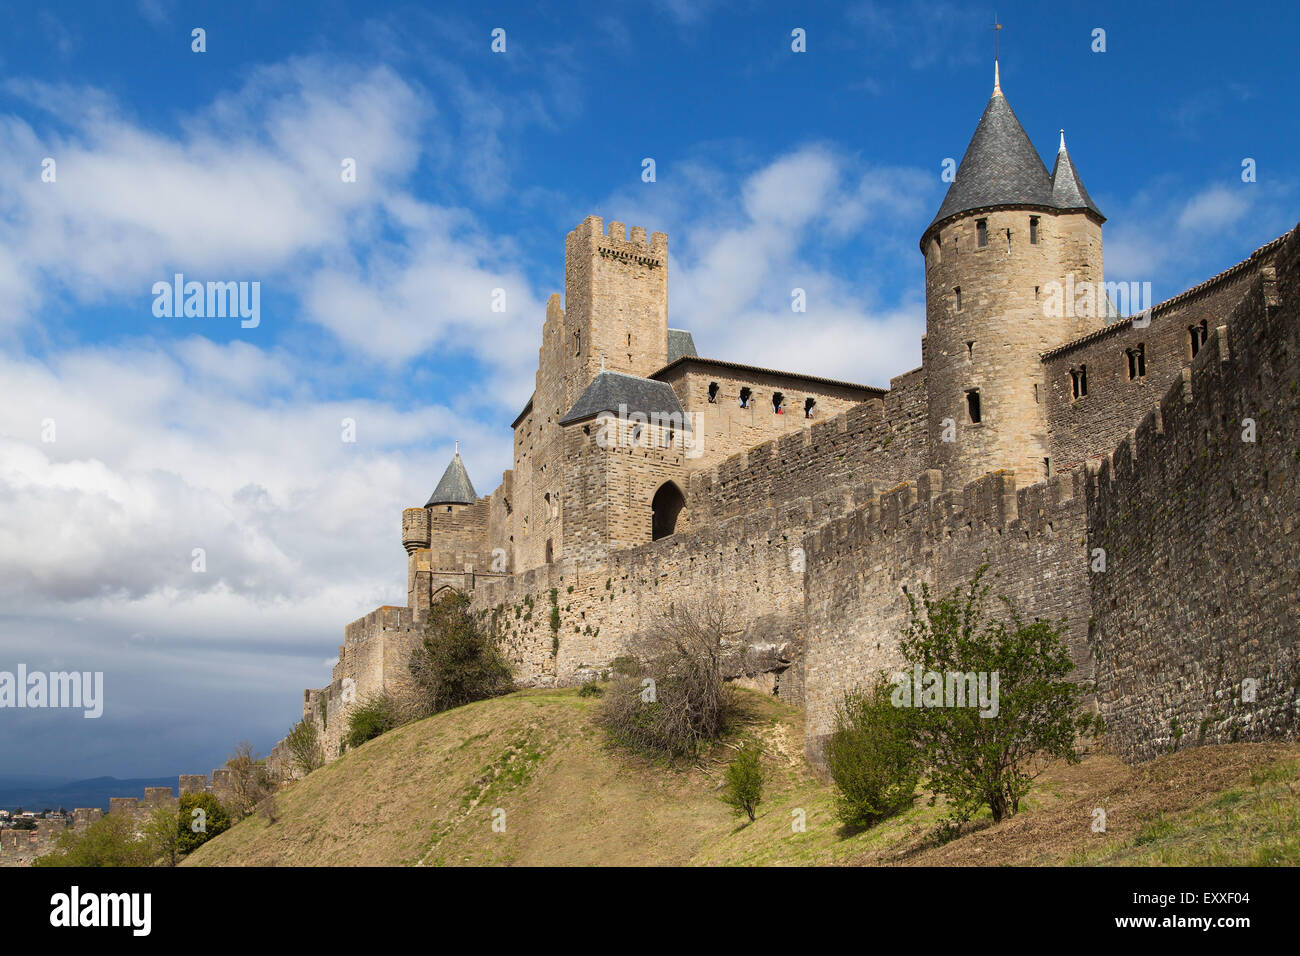 Ramparts and towers of the citadel of Carcassonne, Languedoc-Roussillon, France. Stock Photo